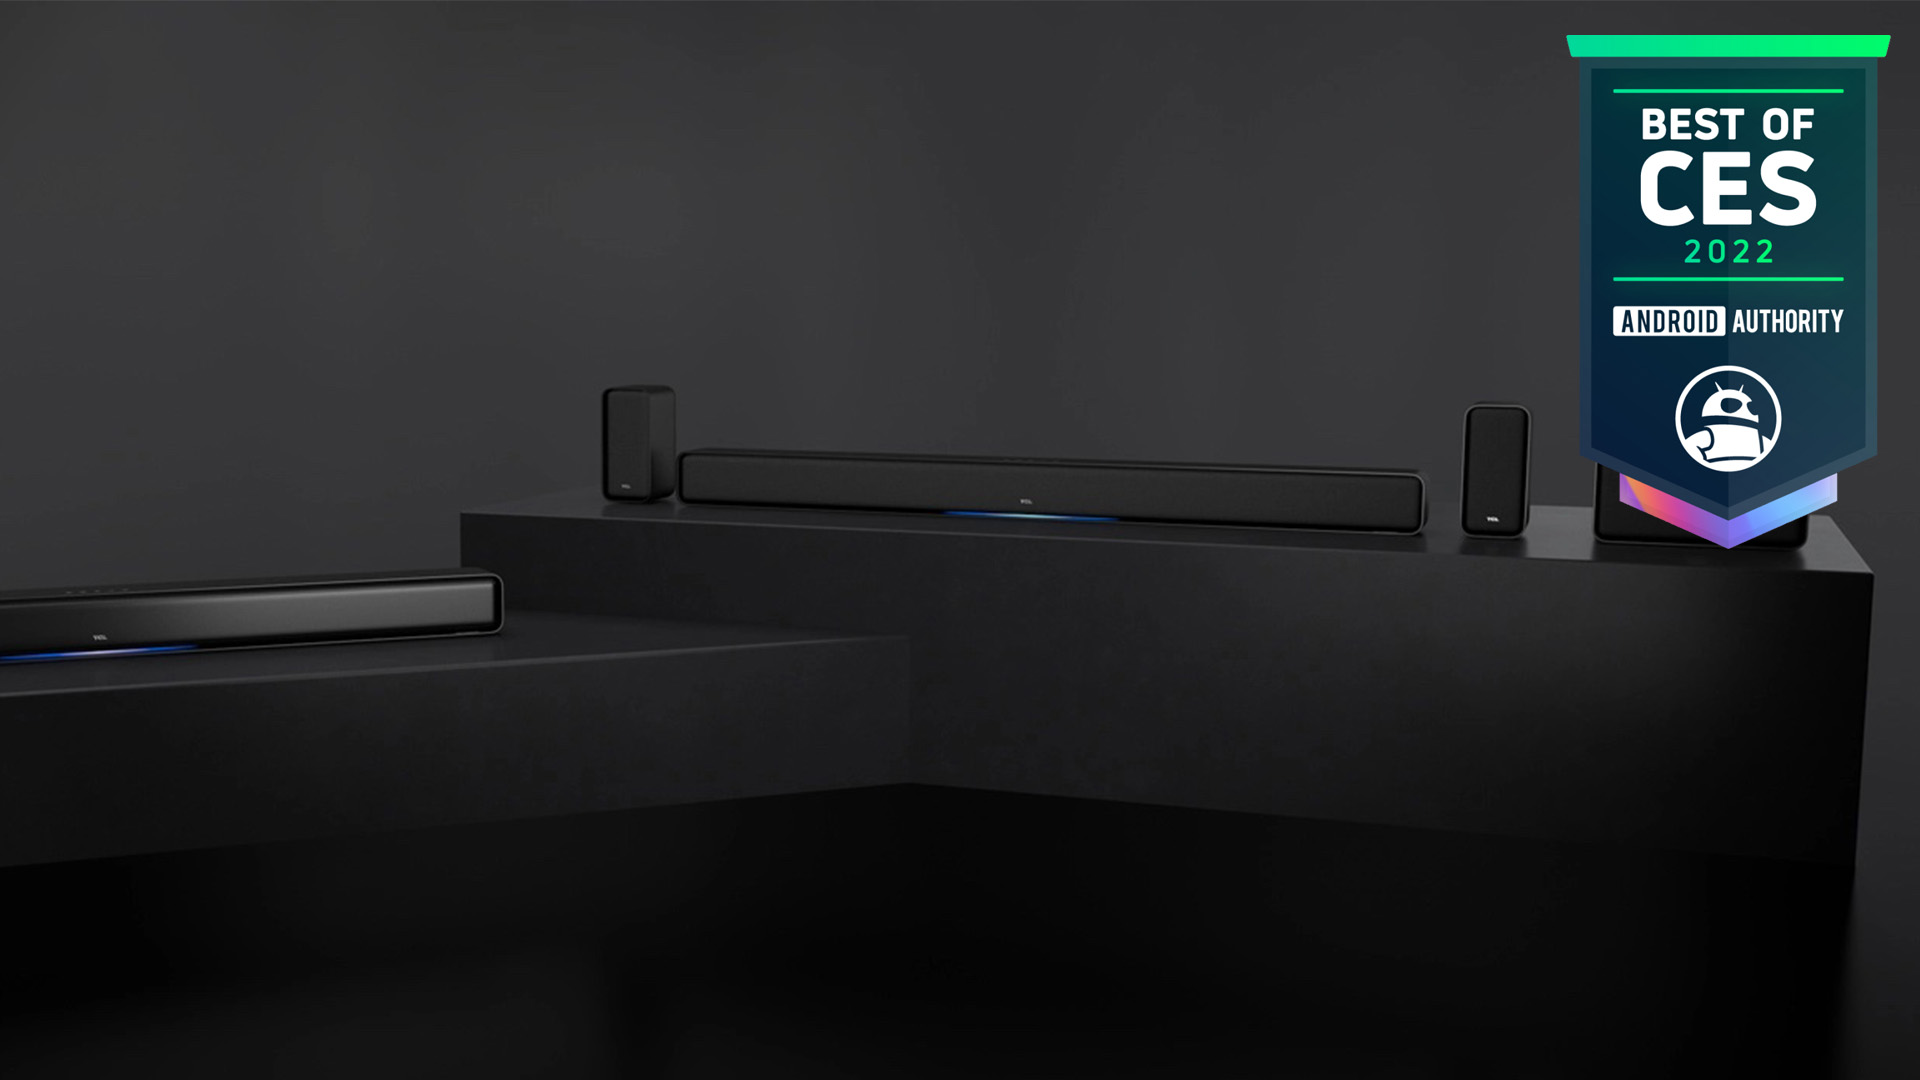 TCL Alto 9 Series soundbar Android Authority Best of CES 2022 Award winner